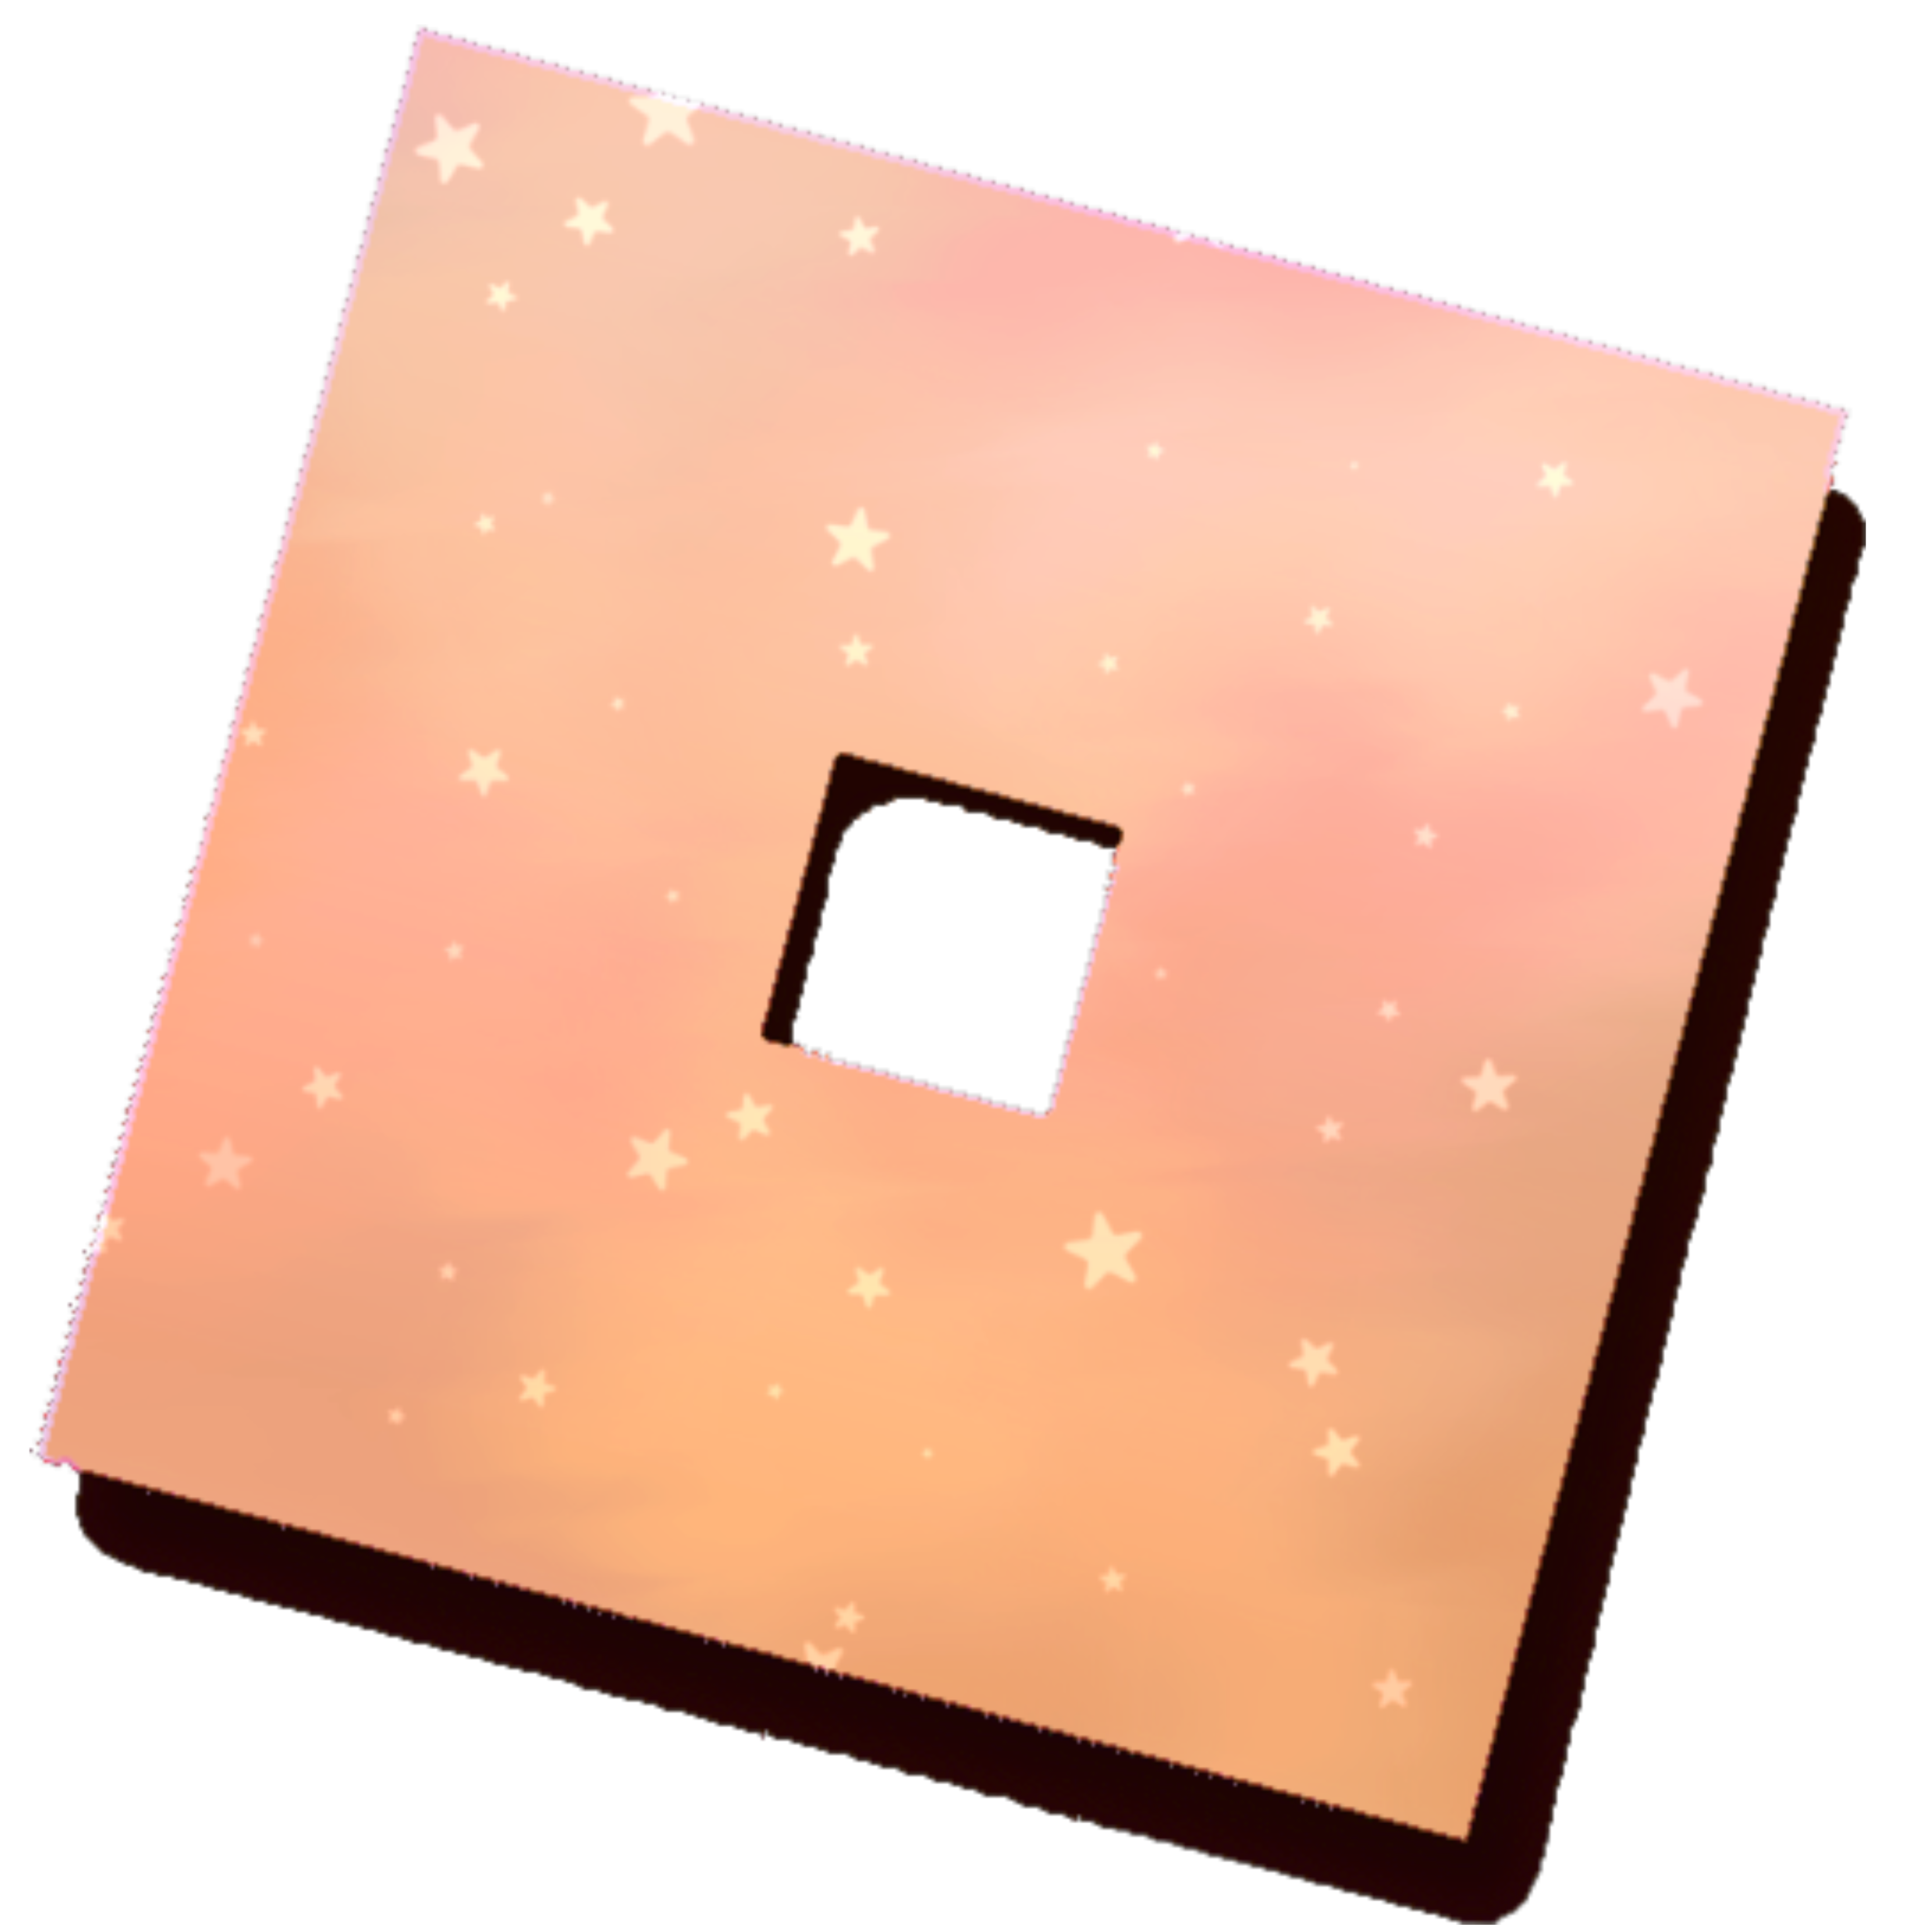 Sticker By That Girl That Got Famous With Stickers - roblox logo aesthetic